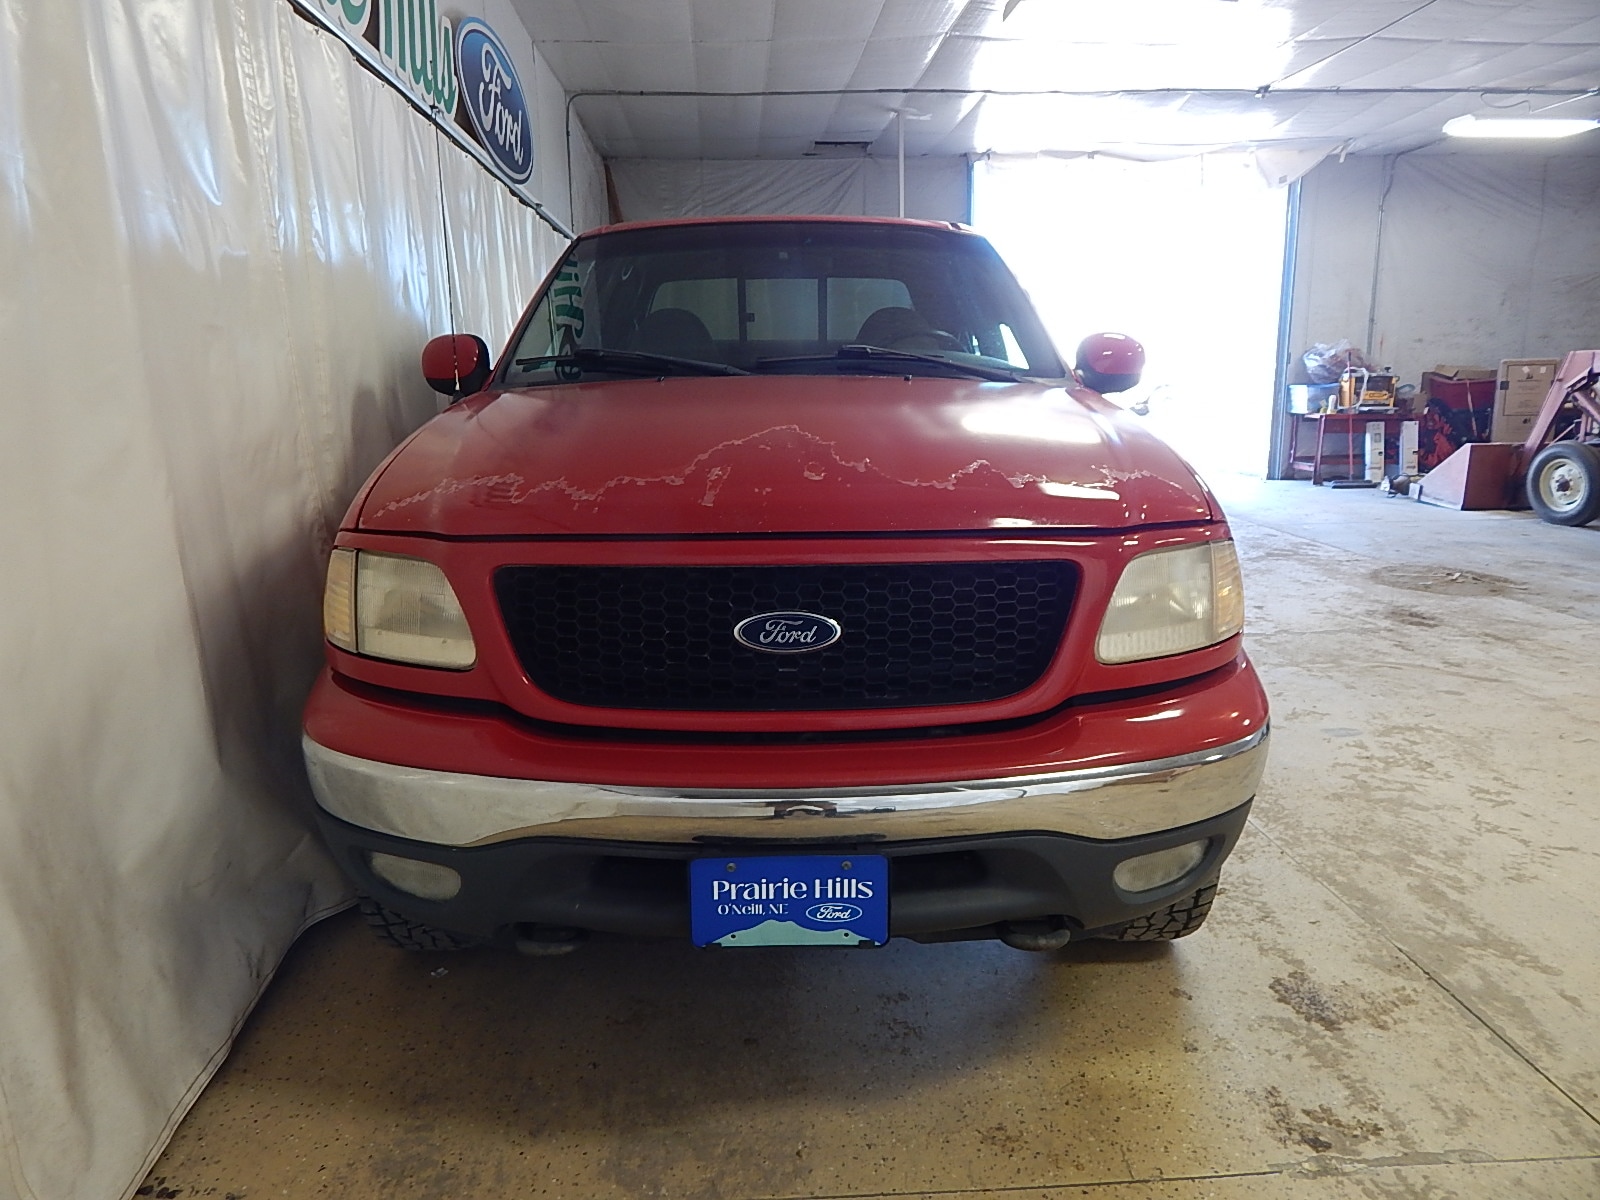 Used 2001 Ford F-150 XLT with VIN 1FTRW08W91KD54491 for sale in O'neill, NE